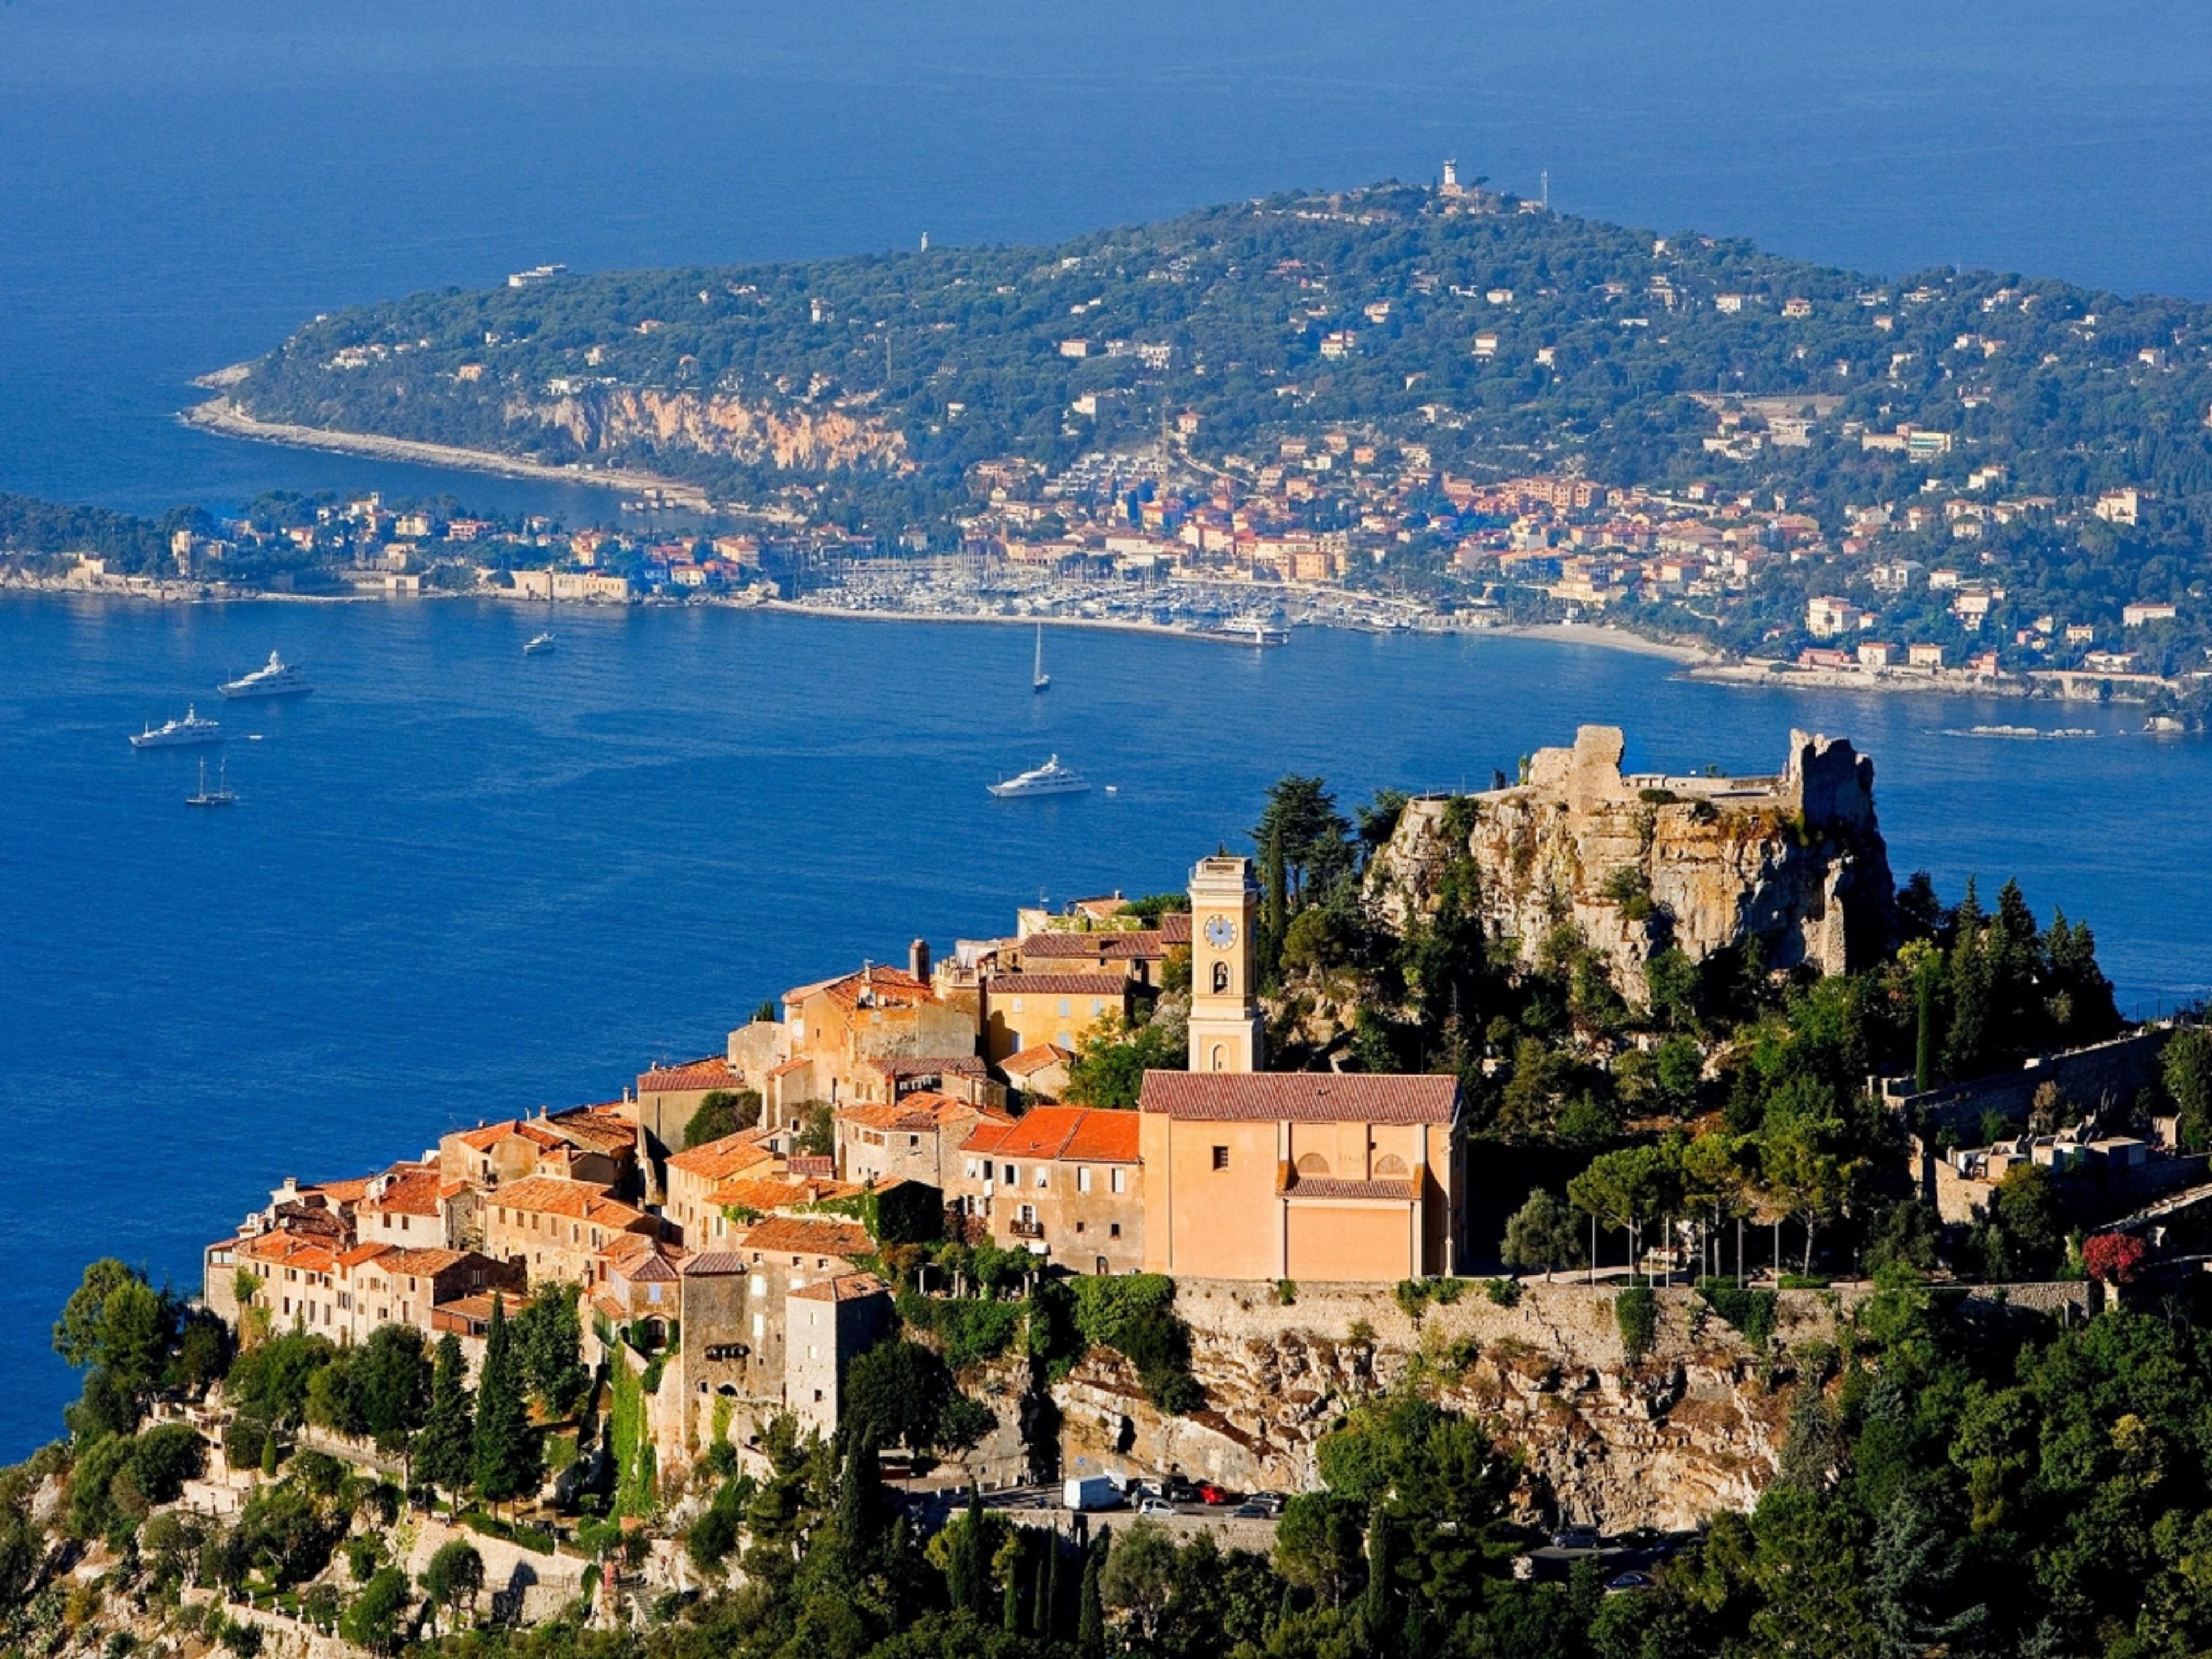 Book our « French Riviera Package », and discover the Côte d’Azur through 3 wonderful tours! D1 : Visit Eze,  Monaco & Monte Carlo - D2 : Excursion in Cannes, Antibes & St Paul de Vence - D3 : Discover Tourettes-sur-Loup, Gourdon & Grasse. This package includes also the breakfast, and a dinner in our restaurant Miamici the day of your choice!